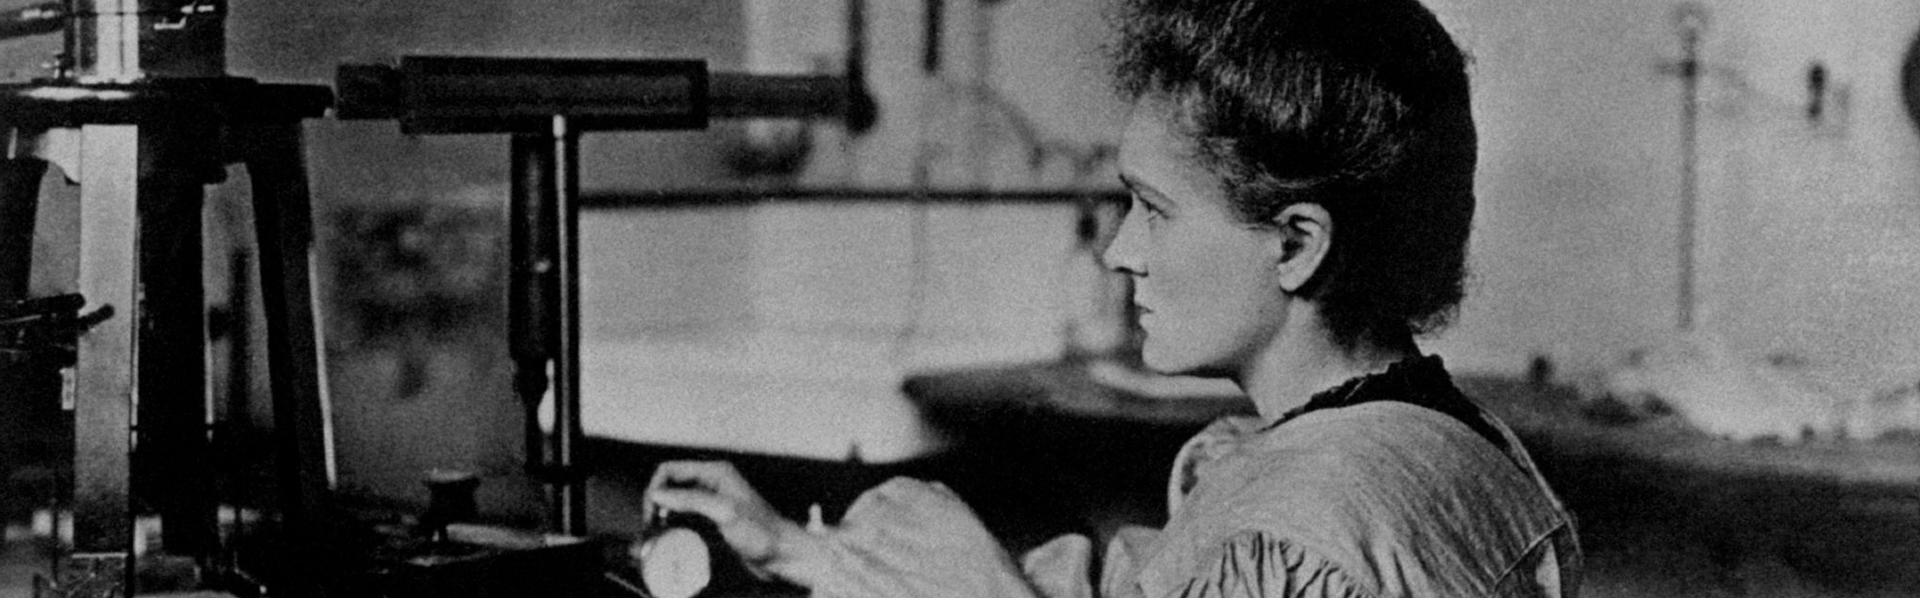 Marie Curie - Dossier RTS Découverte [Wikimedia Commons]